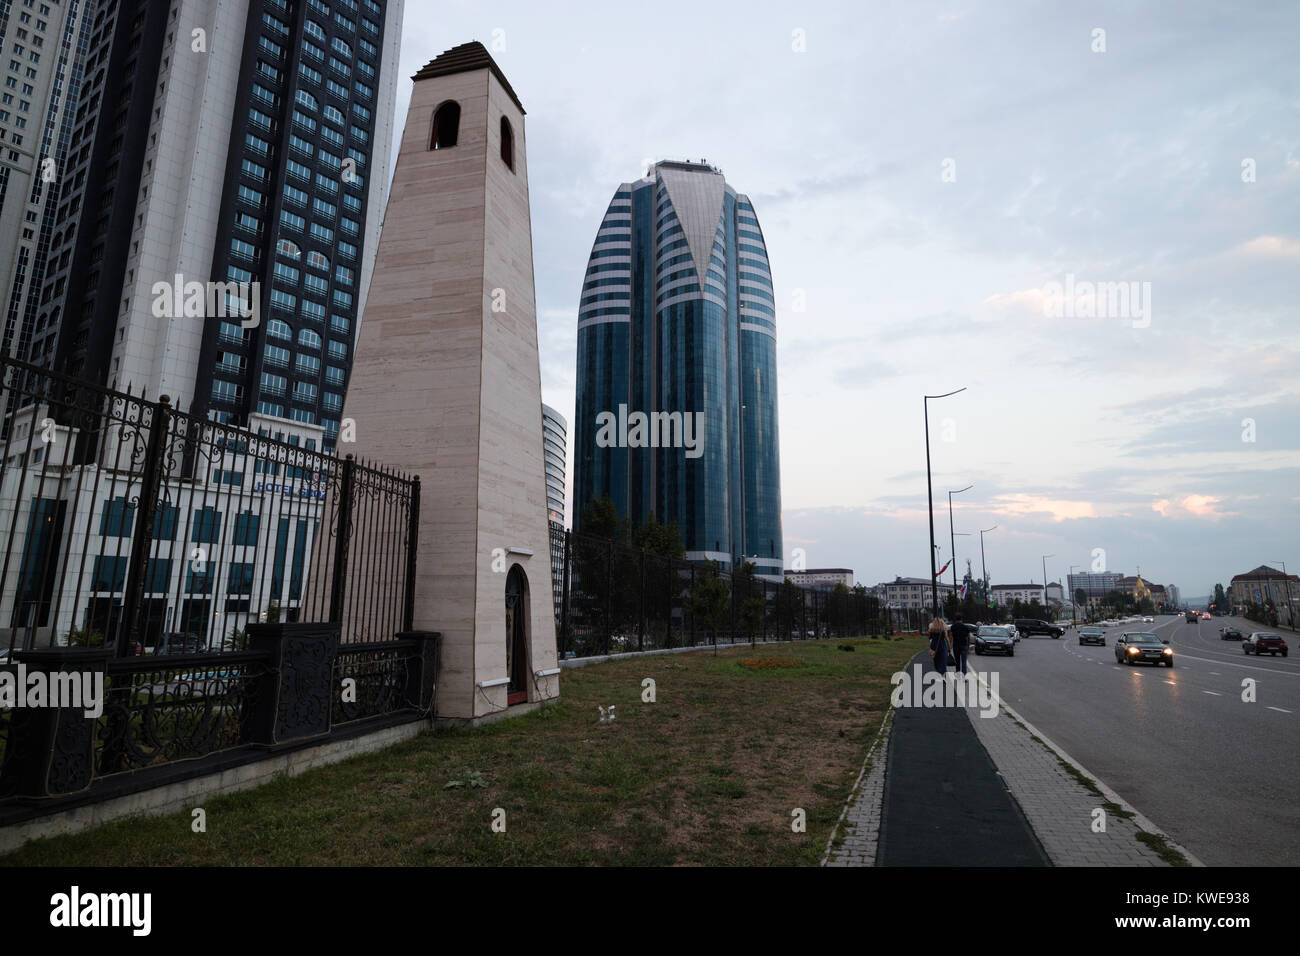 Grozny-City towers (after Nakh or Vainakh medieval towers), these two towers are built after Nakh (or Vainakh) medieval towers Stock Photo